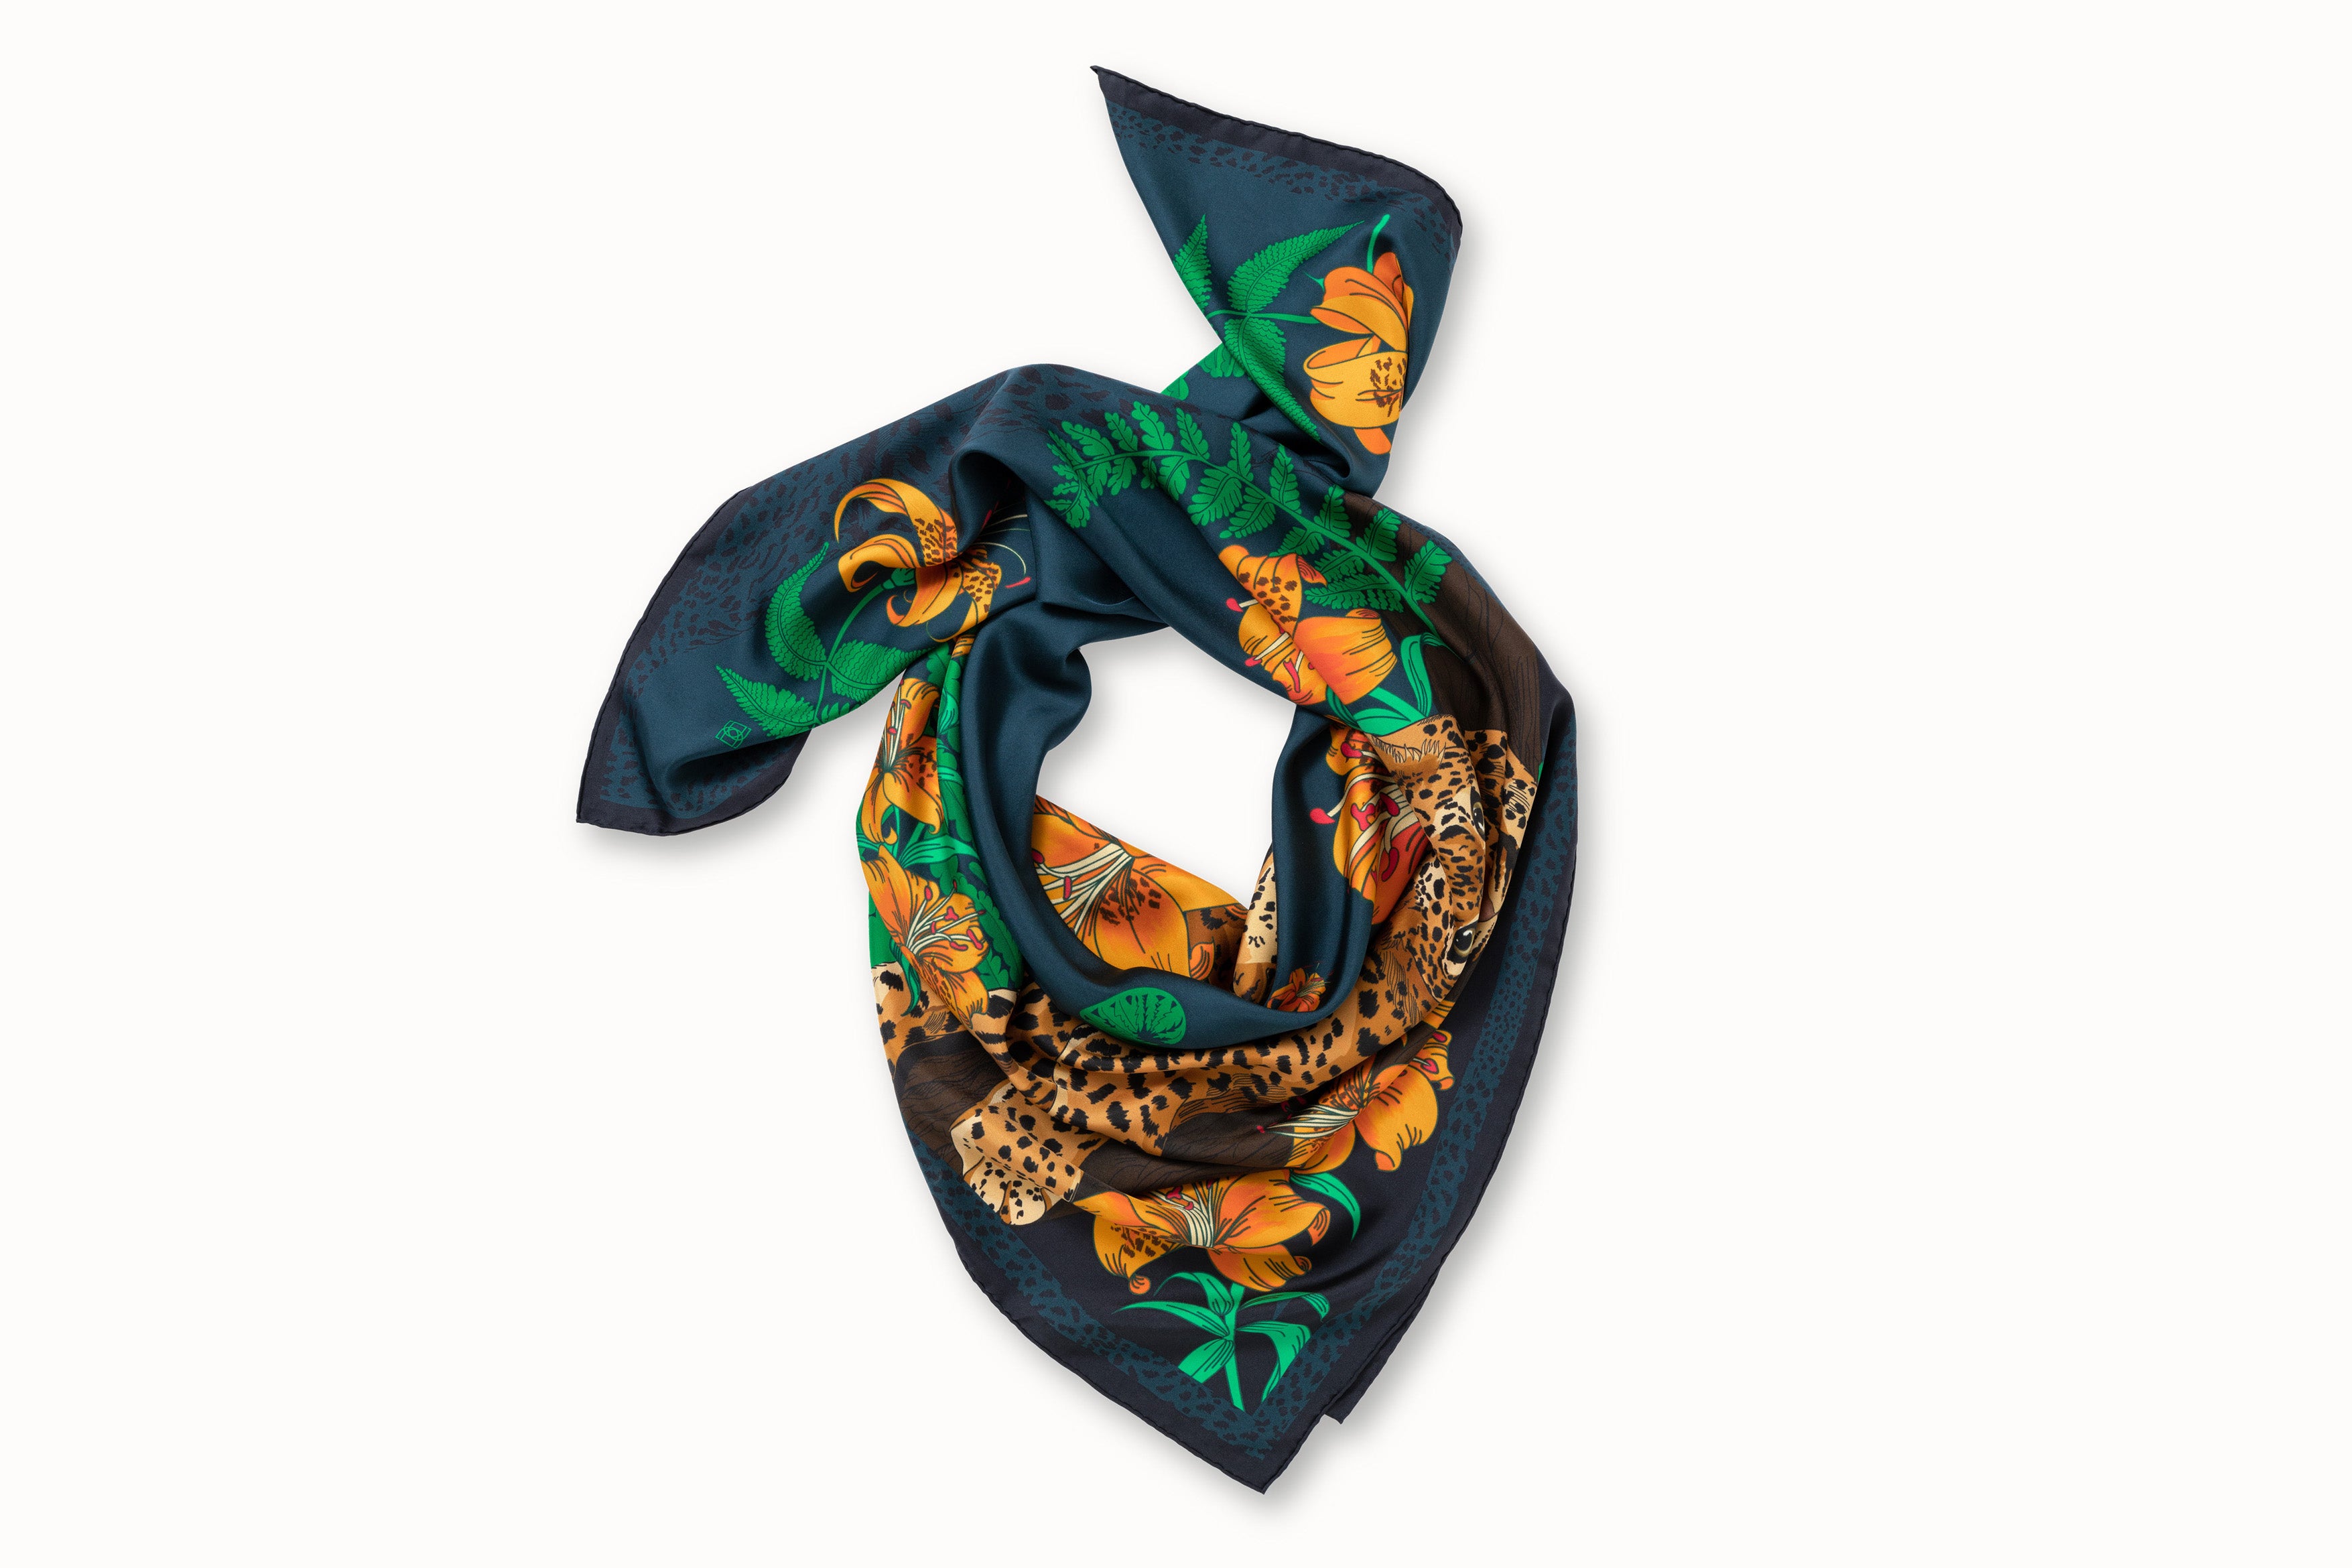 Rolled image of 100% silk square scarf featuring a motif of two leopards lounging in a jungle scene surrounded by lush greenery and tiger lily florals on a marine blue background.